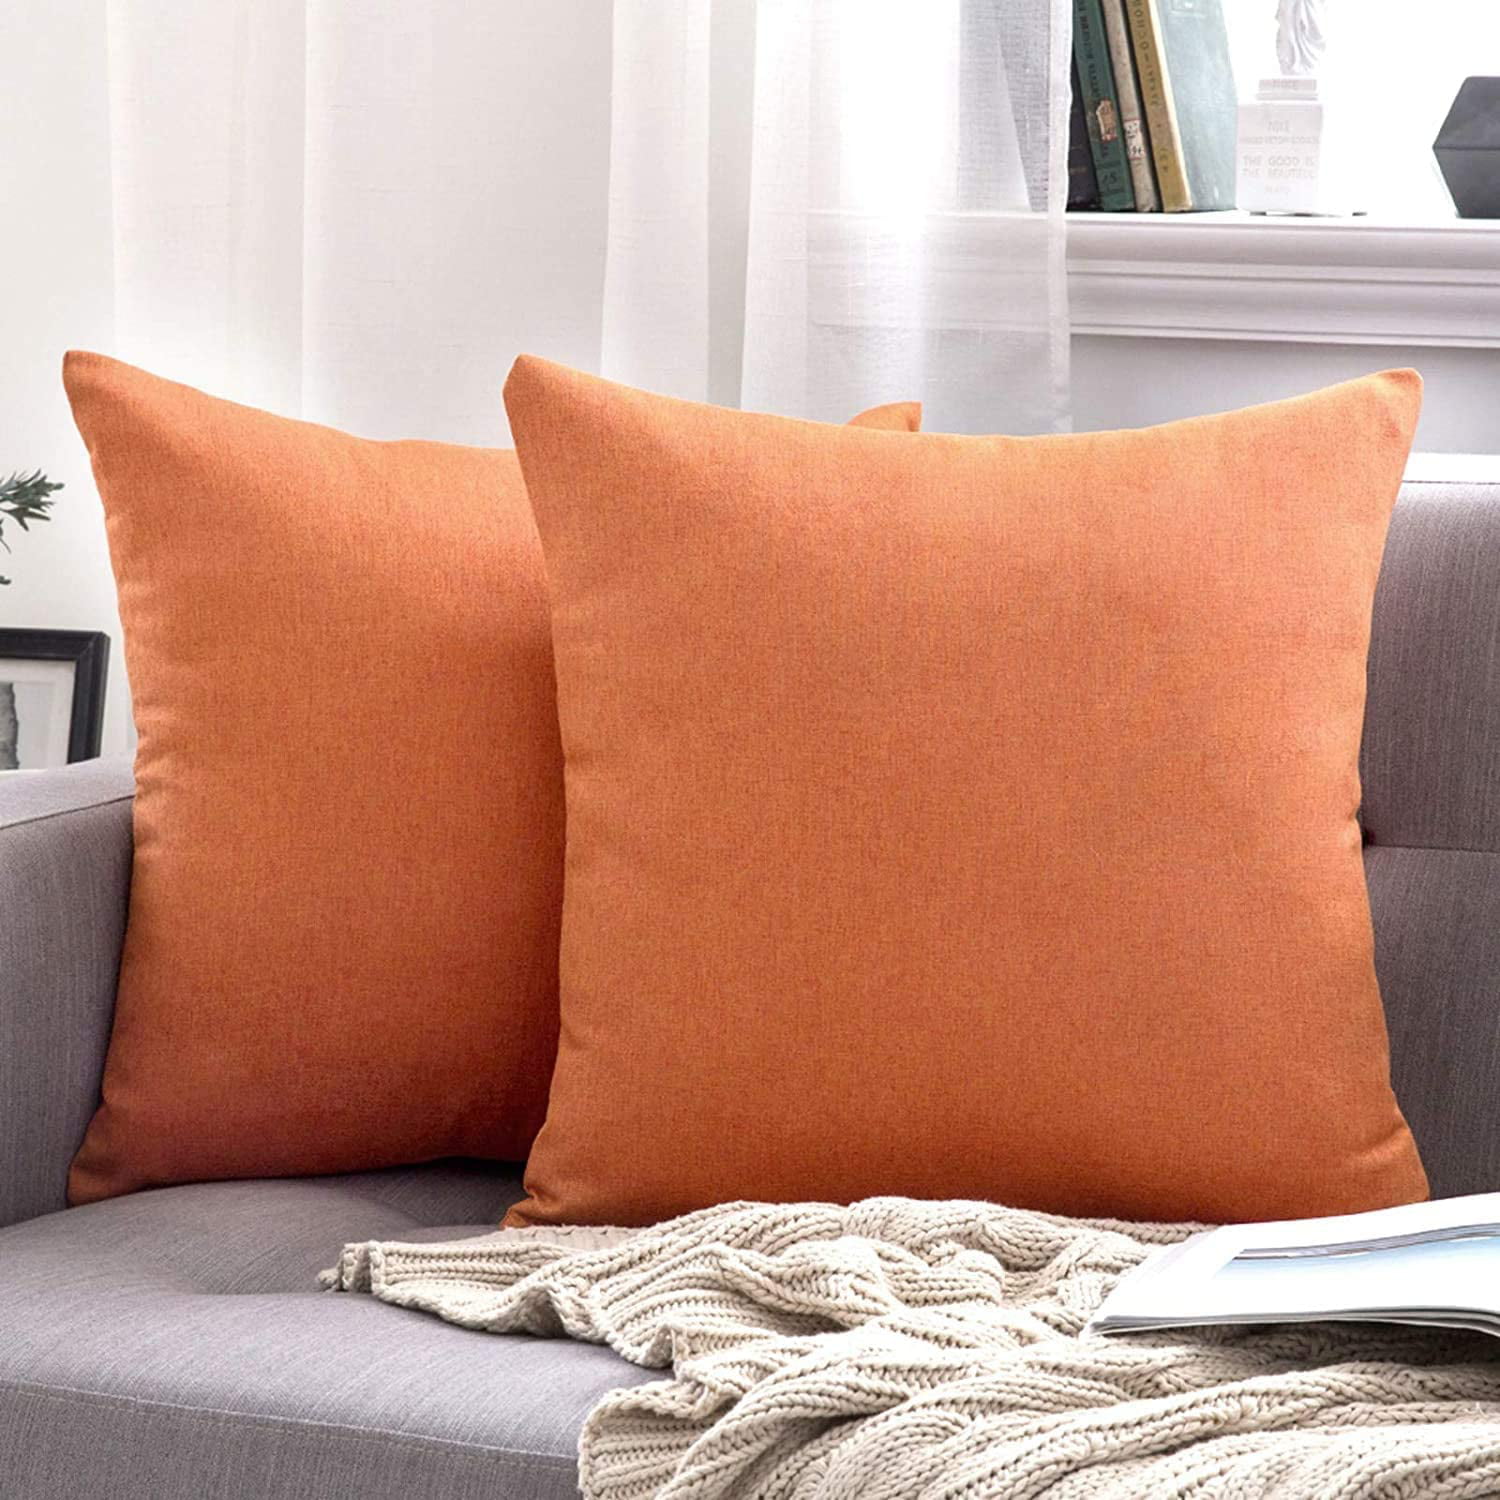 MIULEE Pack of 2 Fall Decorative Outdoor Solid Waterproof Throw Pillow Covers Garden Farmhouse Cushion Cases for Patio Tent Balcony Couch Sofa 12x20 Inch Orange 